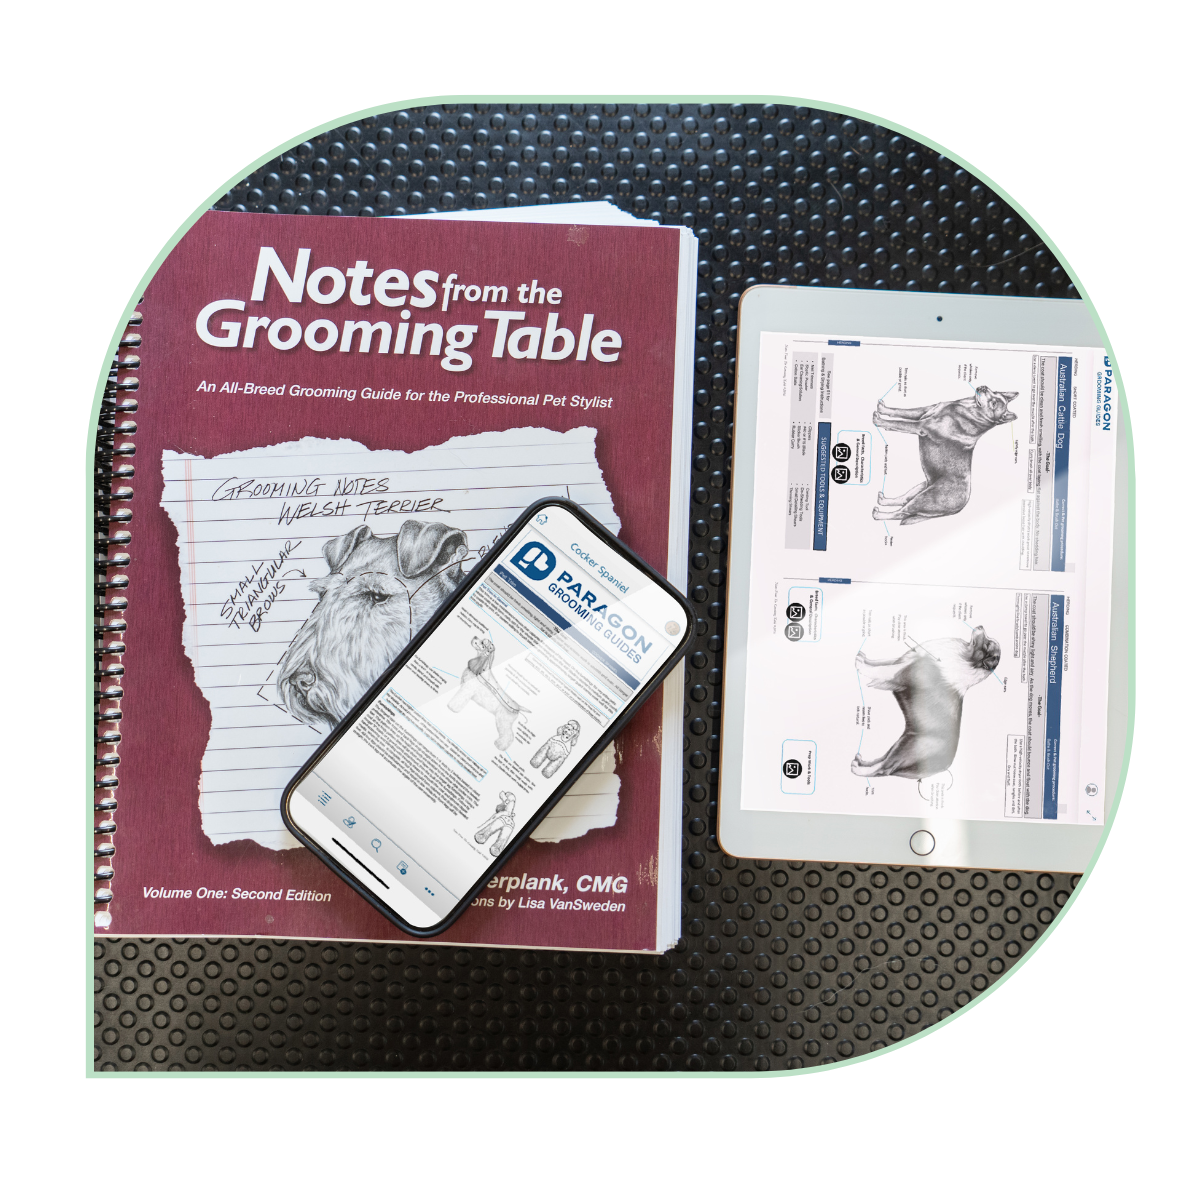 Notes from the Grooming Table book and Devices Inset